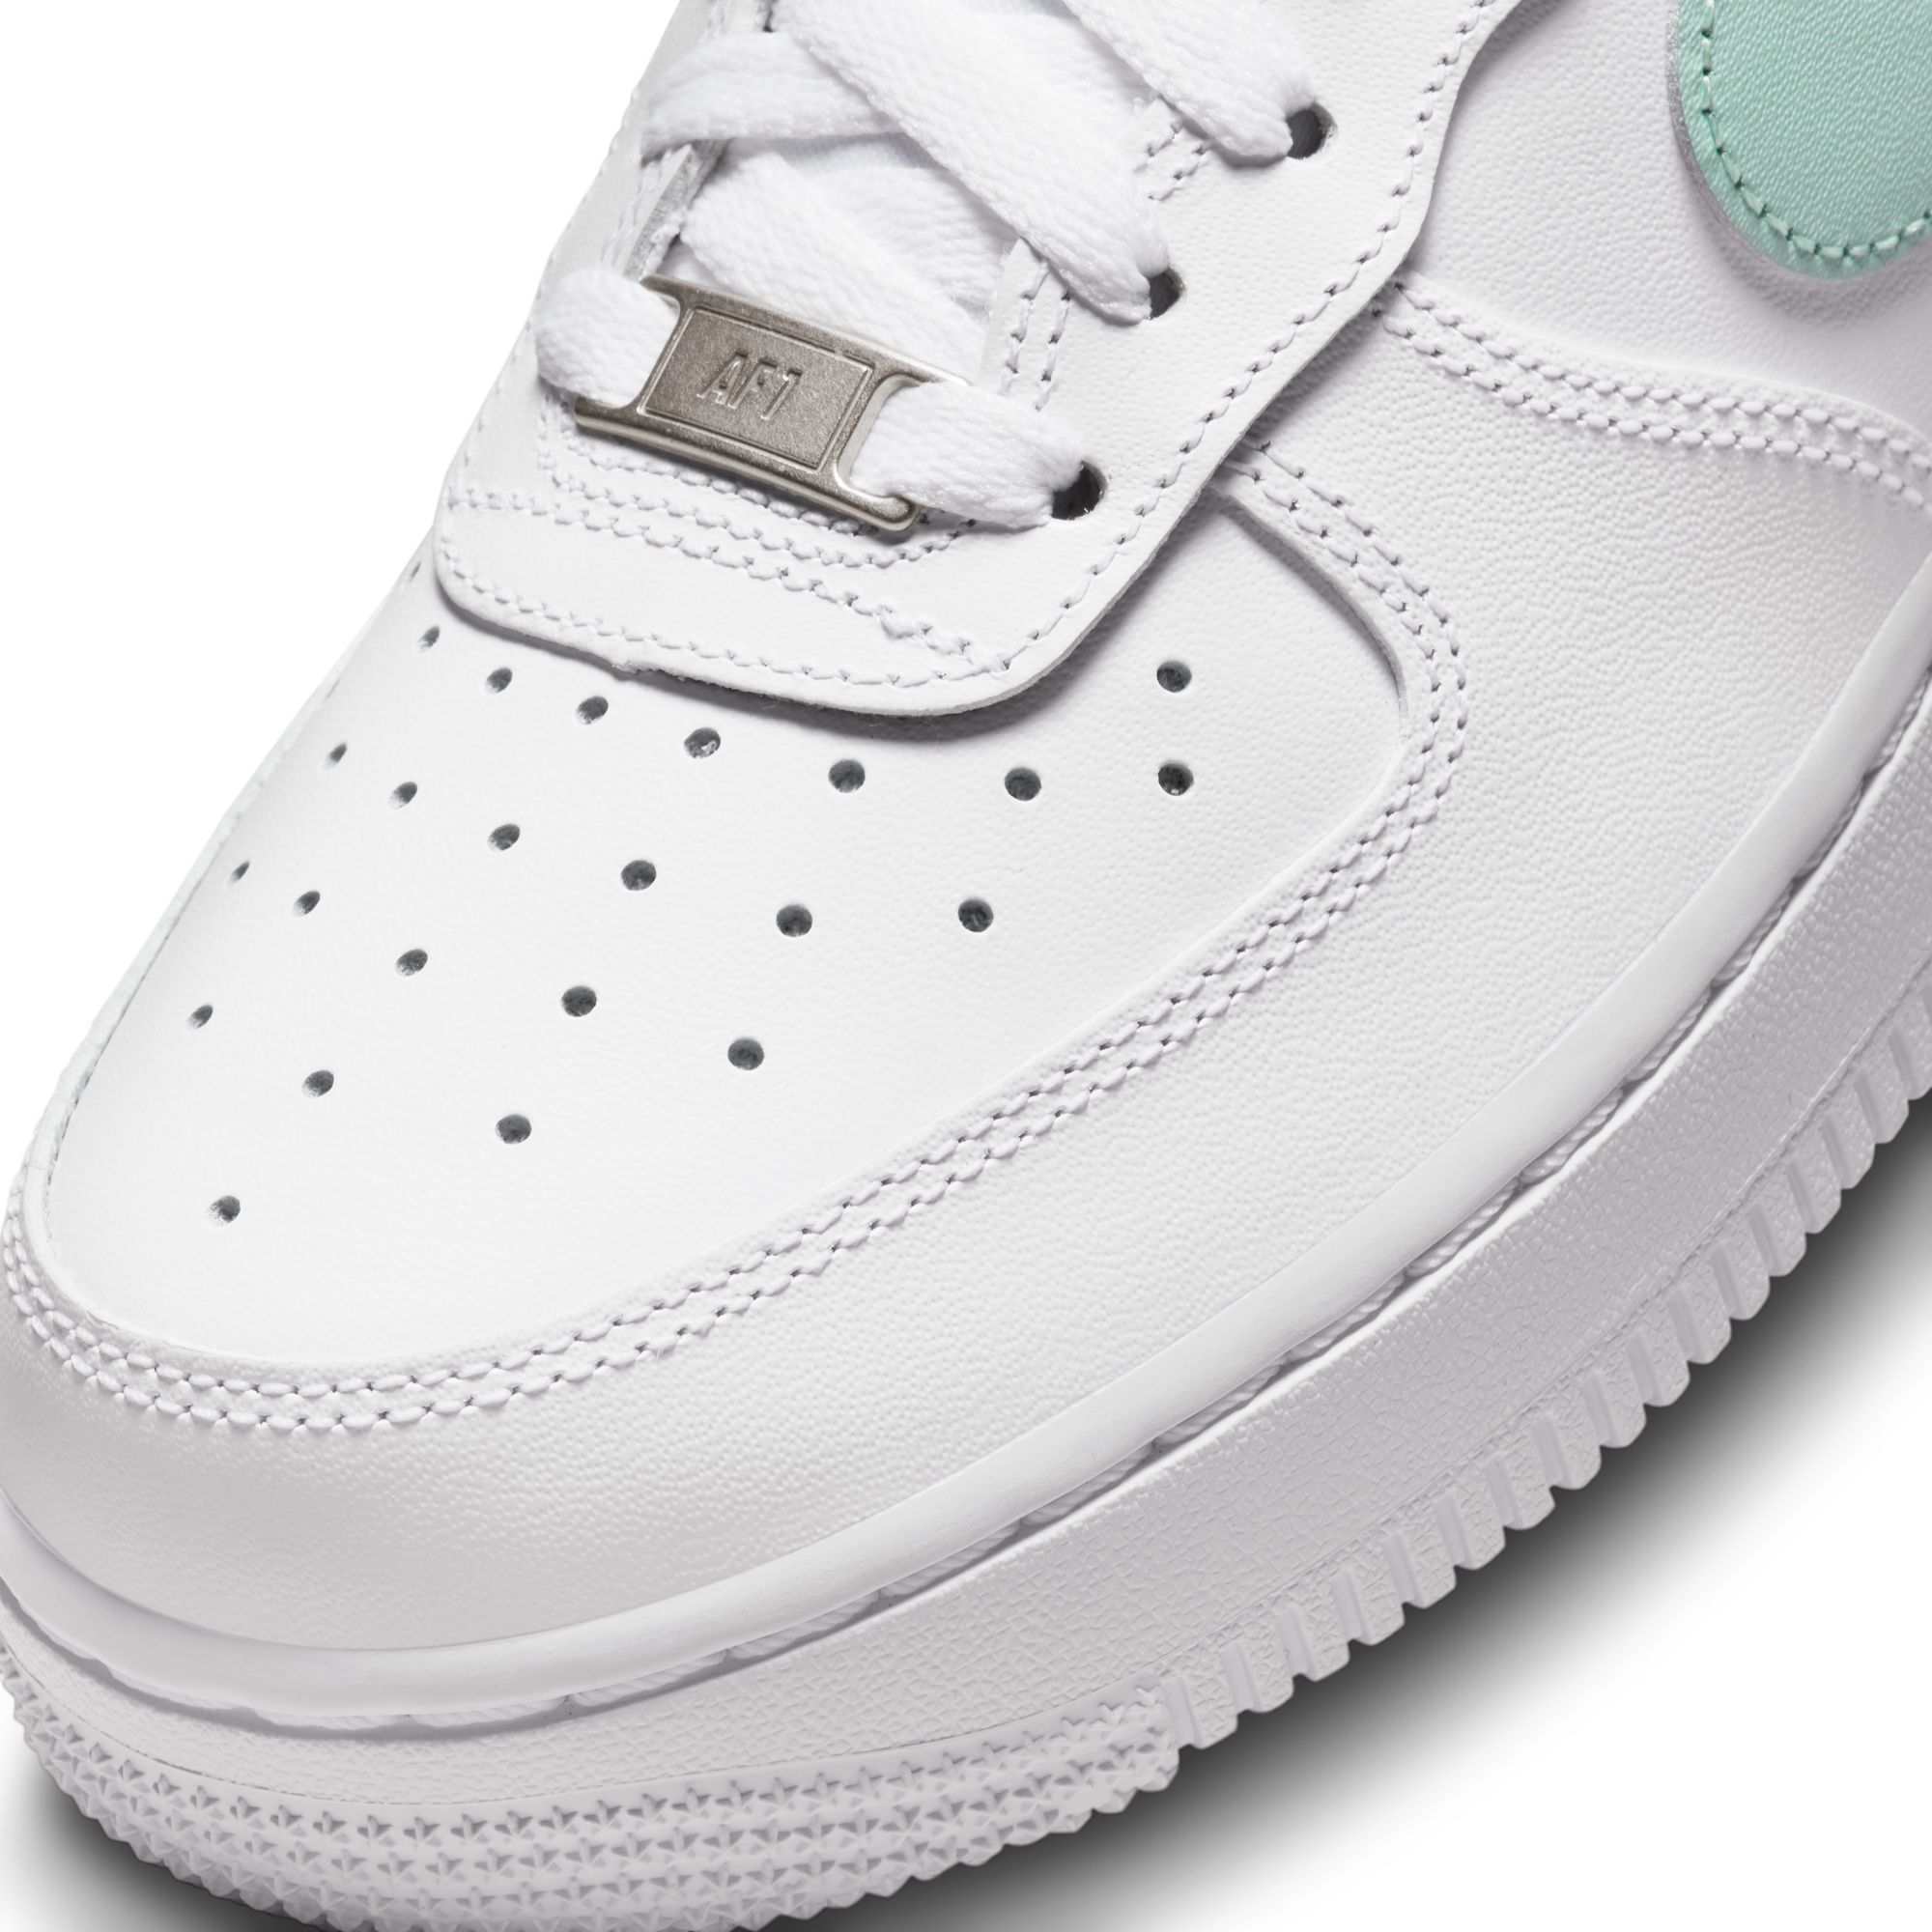 GIÀY THỂ THAO NIKE NỮ AIR FORCE 1 07 EASYON WHITE ICE JADE WOMENS SHOES DX5883-101 1